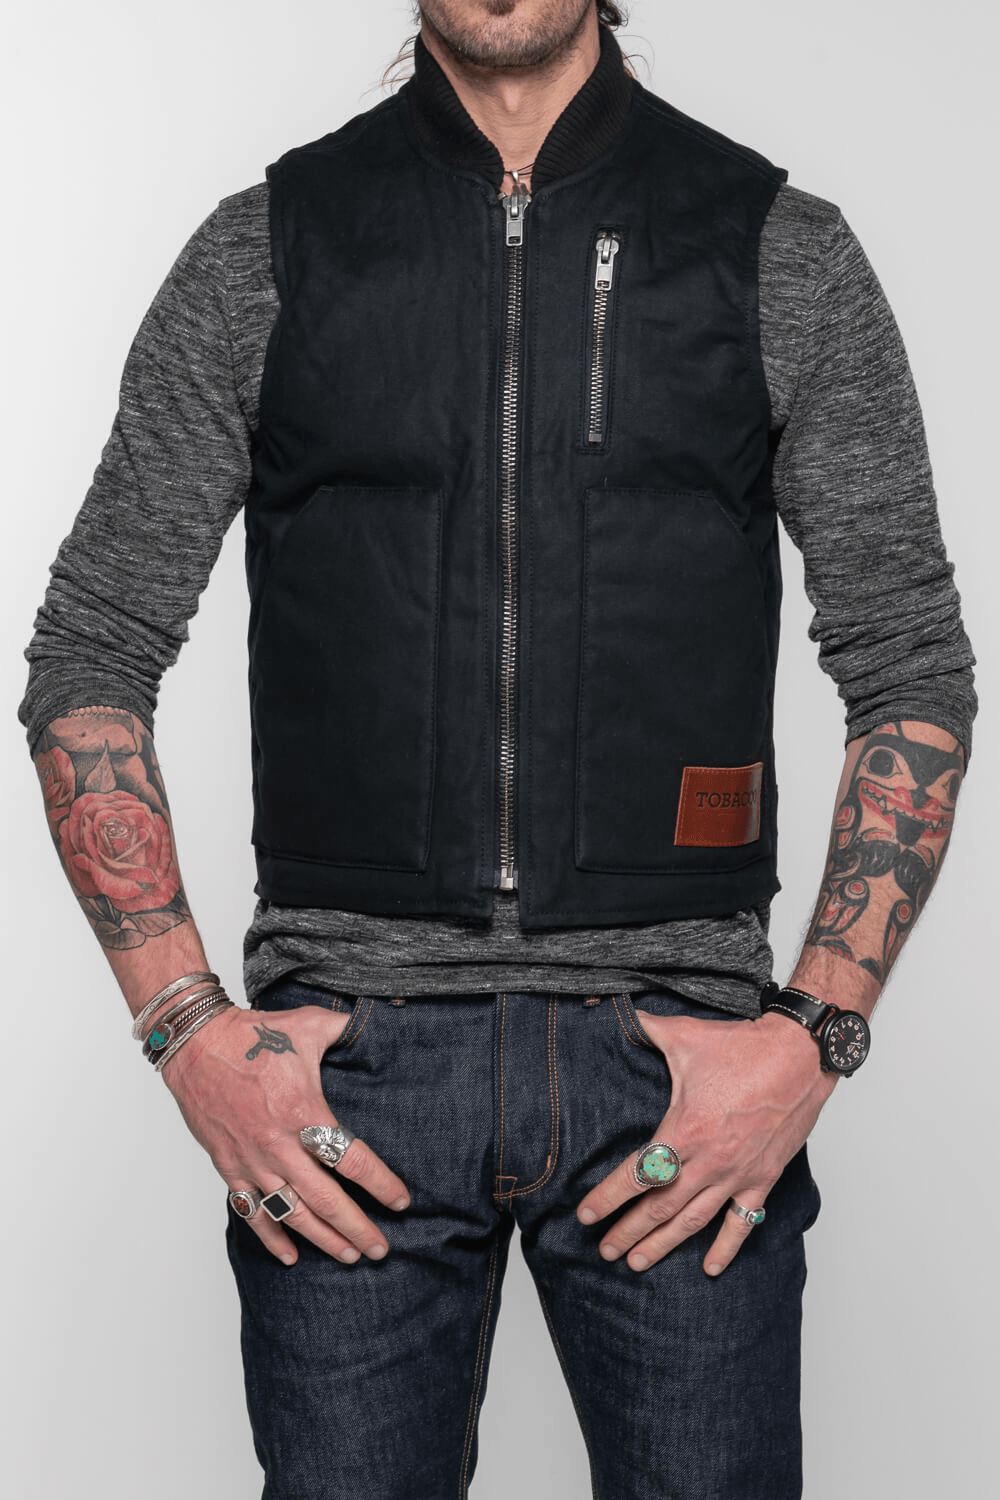 klok span Catena The Wasteland Protective Vest - Black. Large Back Pocket for a D3O® Back  Armor Protector. 15oz Waxed Cotton Canvas. Water Resistant. - Tobacco  Motorwear